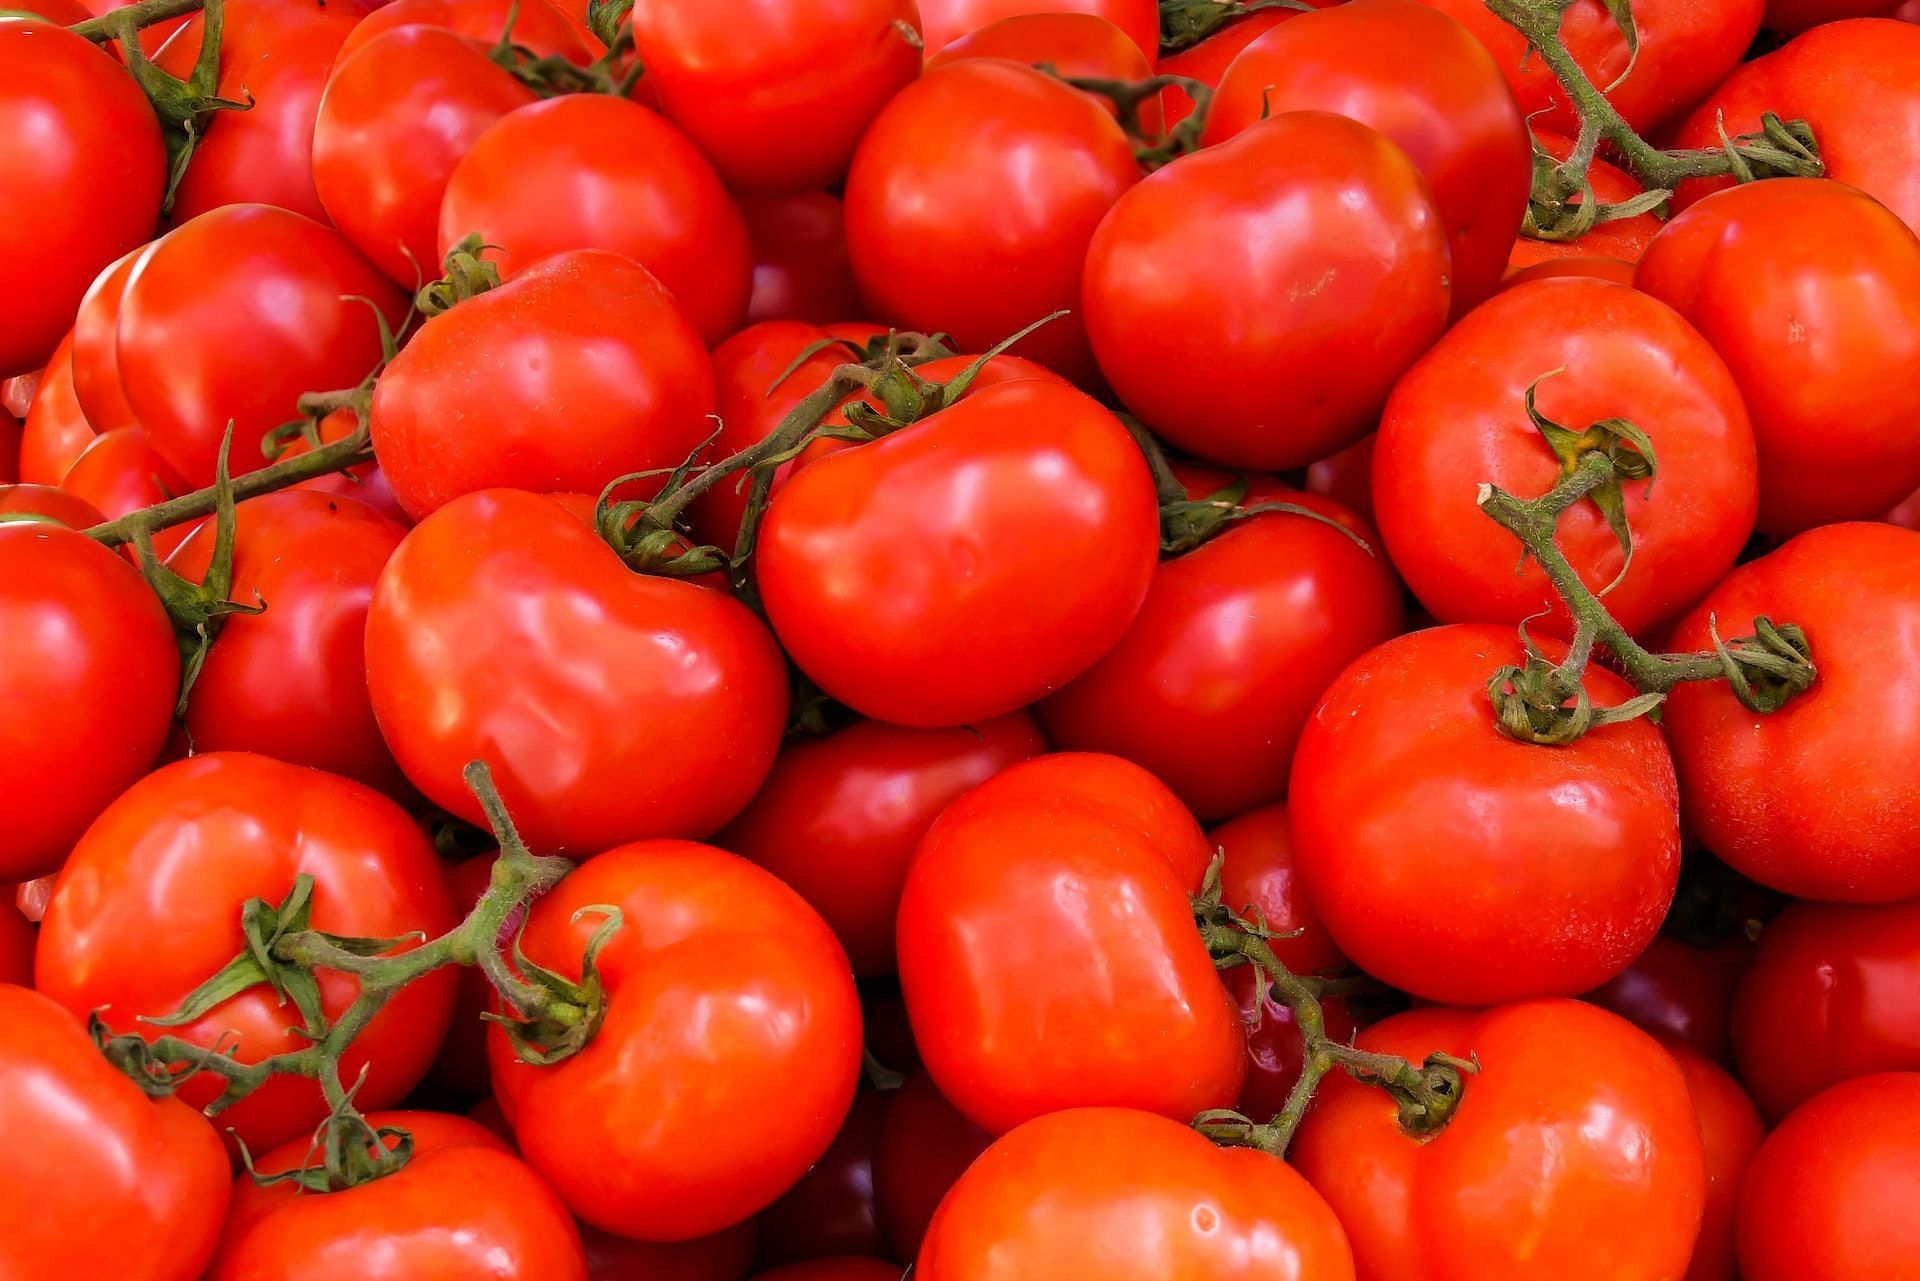 Tomatoes are a great source of vitamin C. (Image via Pexels/Pixabay)